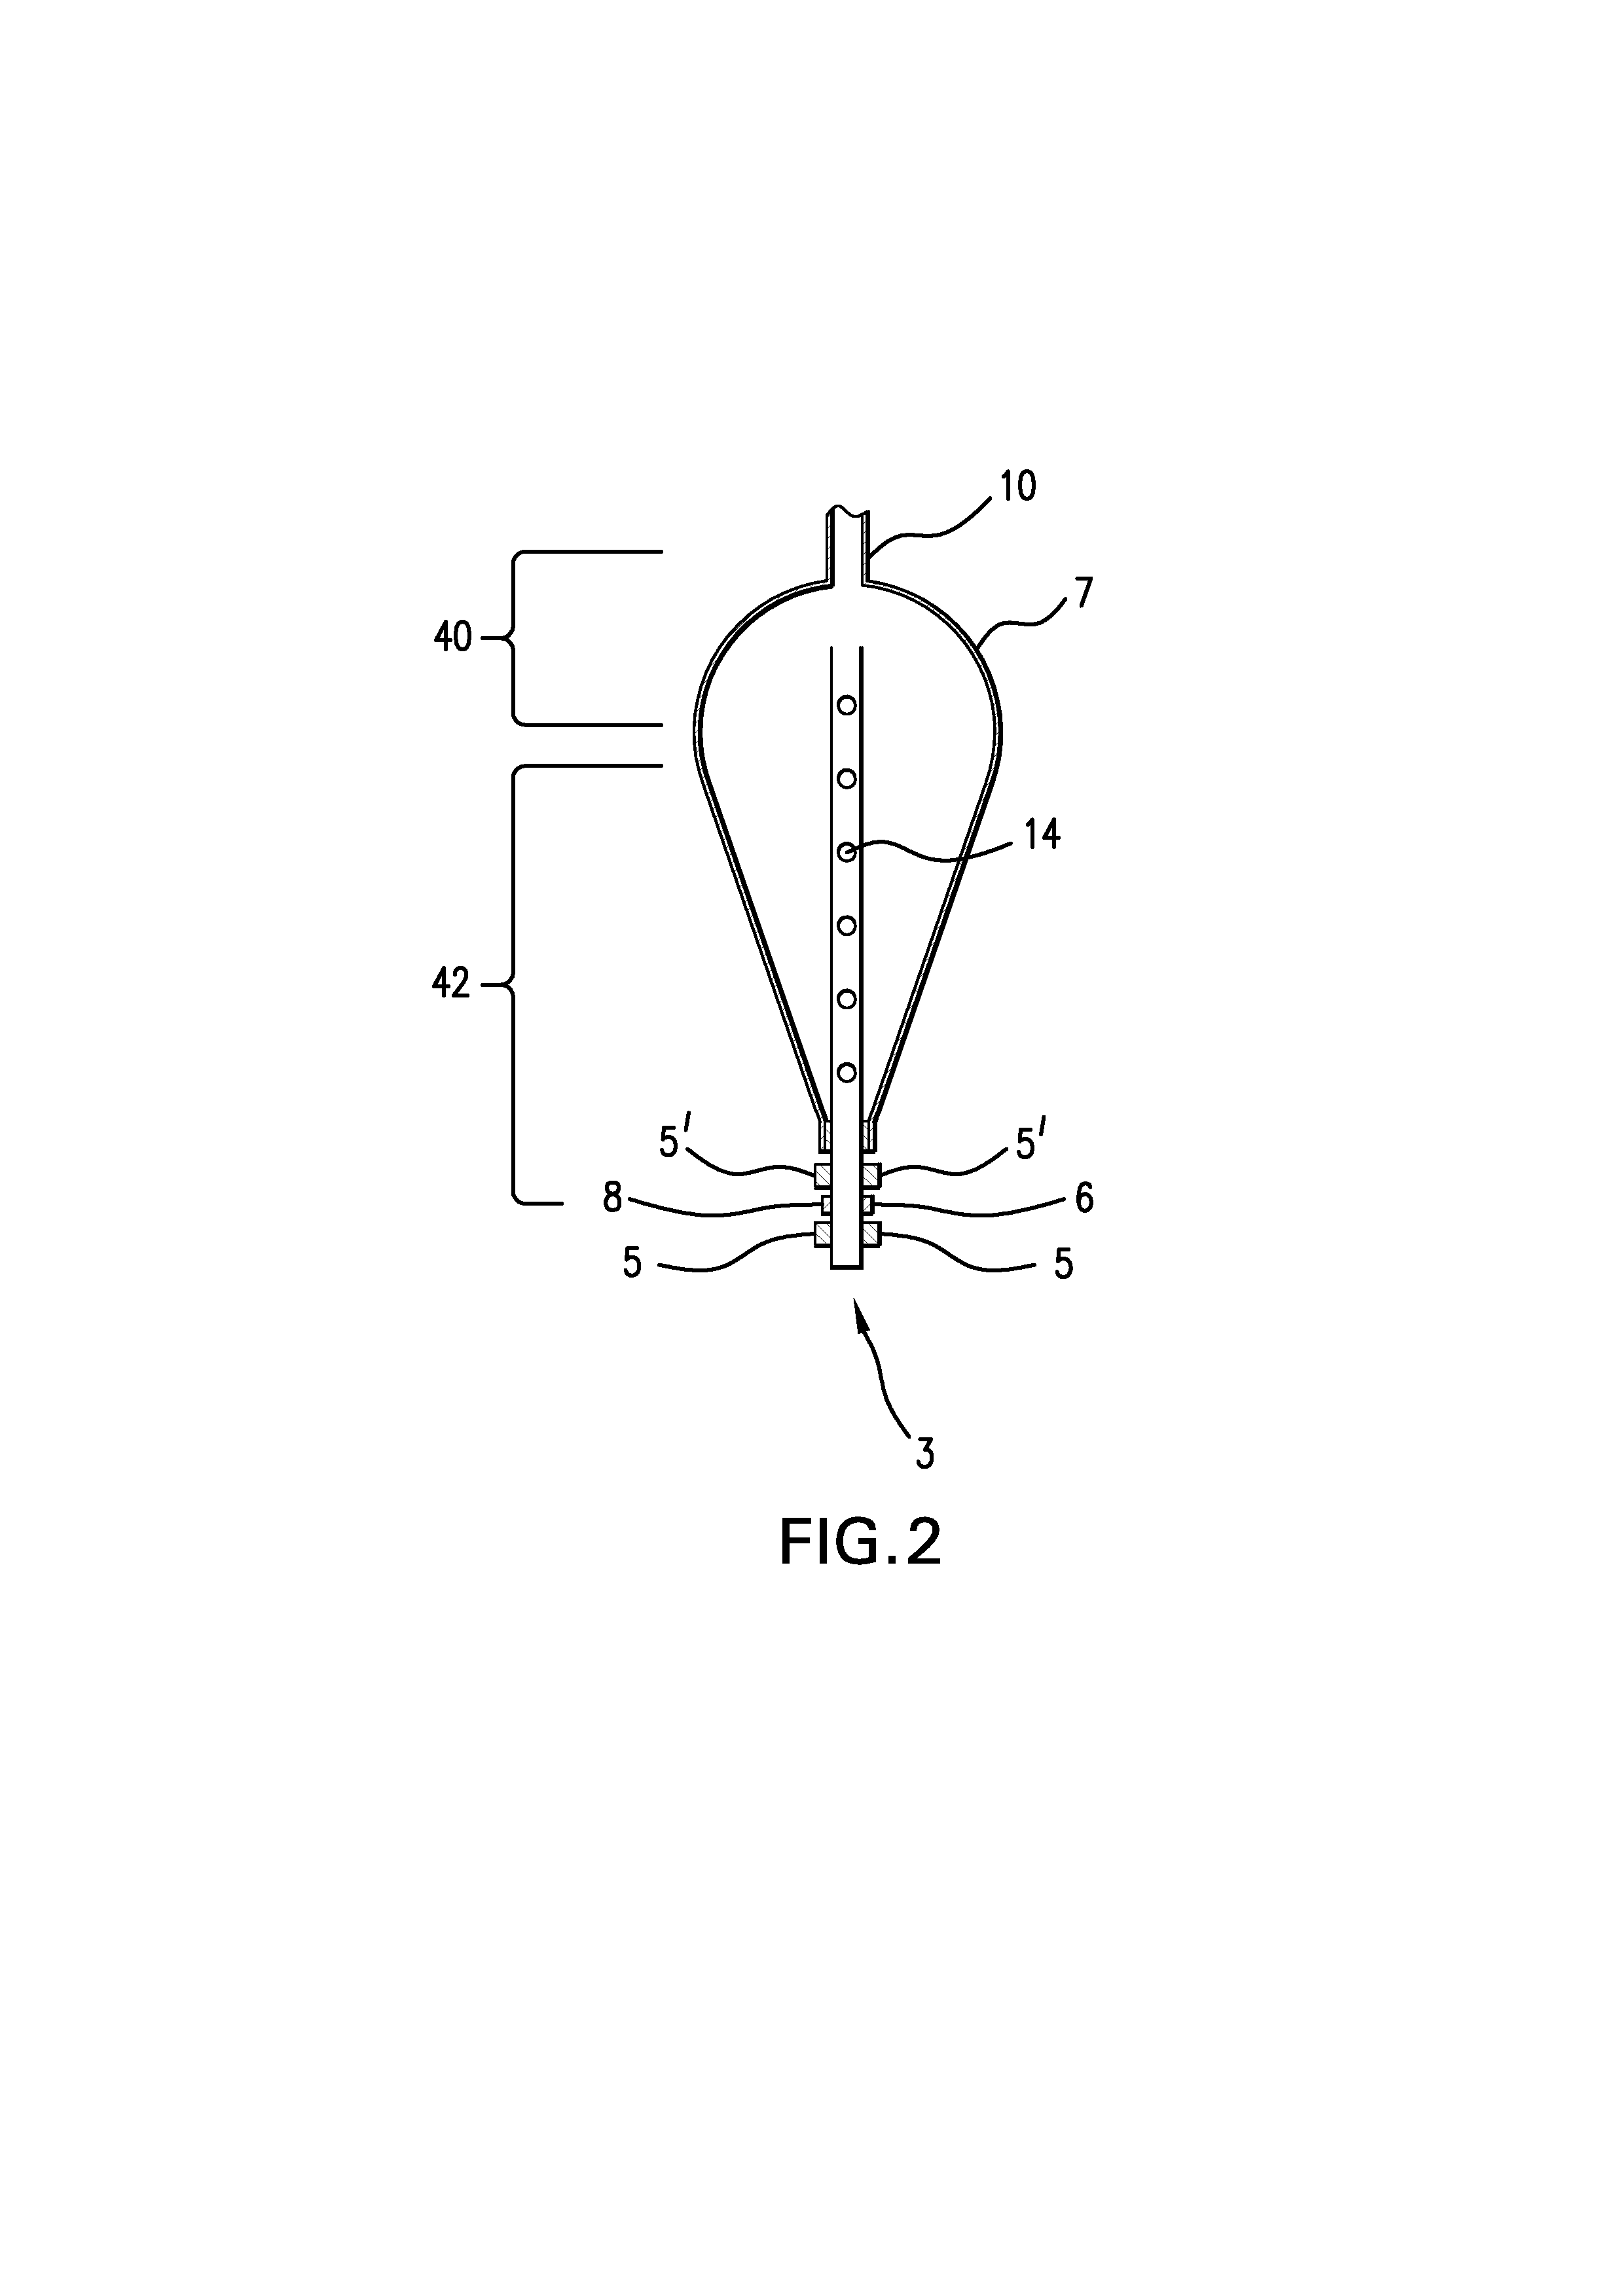 Double balloon pump cardiac assist device and related method of use